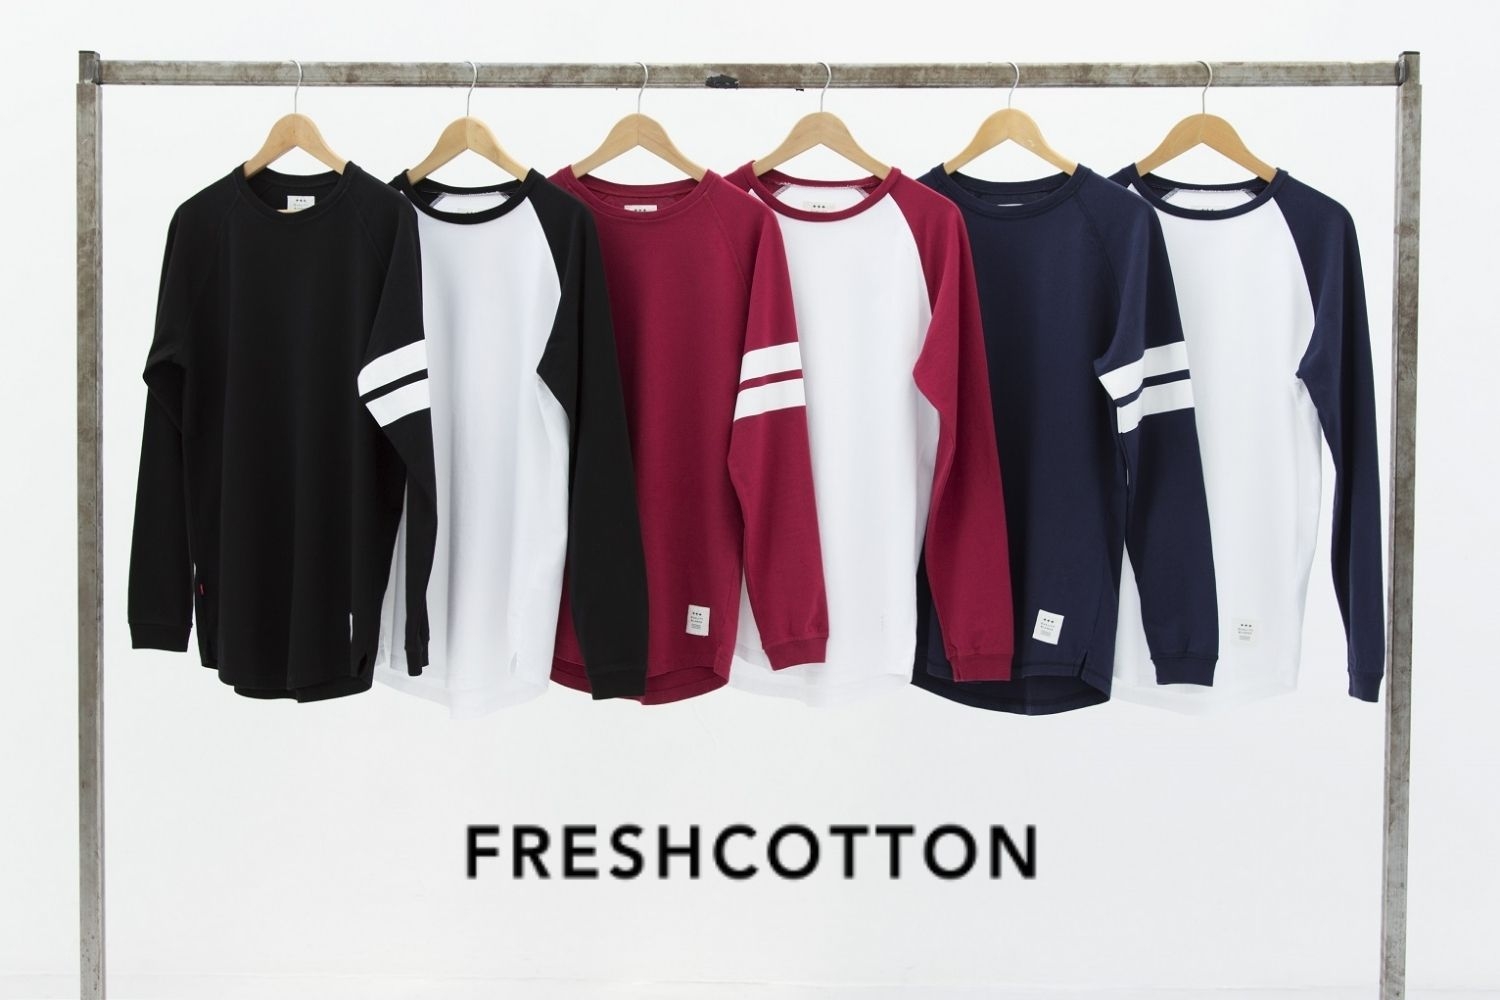 Shop the Quality Blanks collection now at Freshcotton